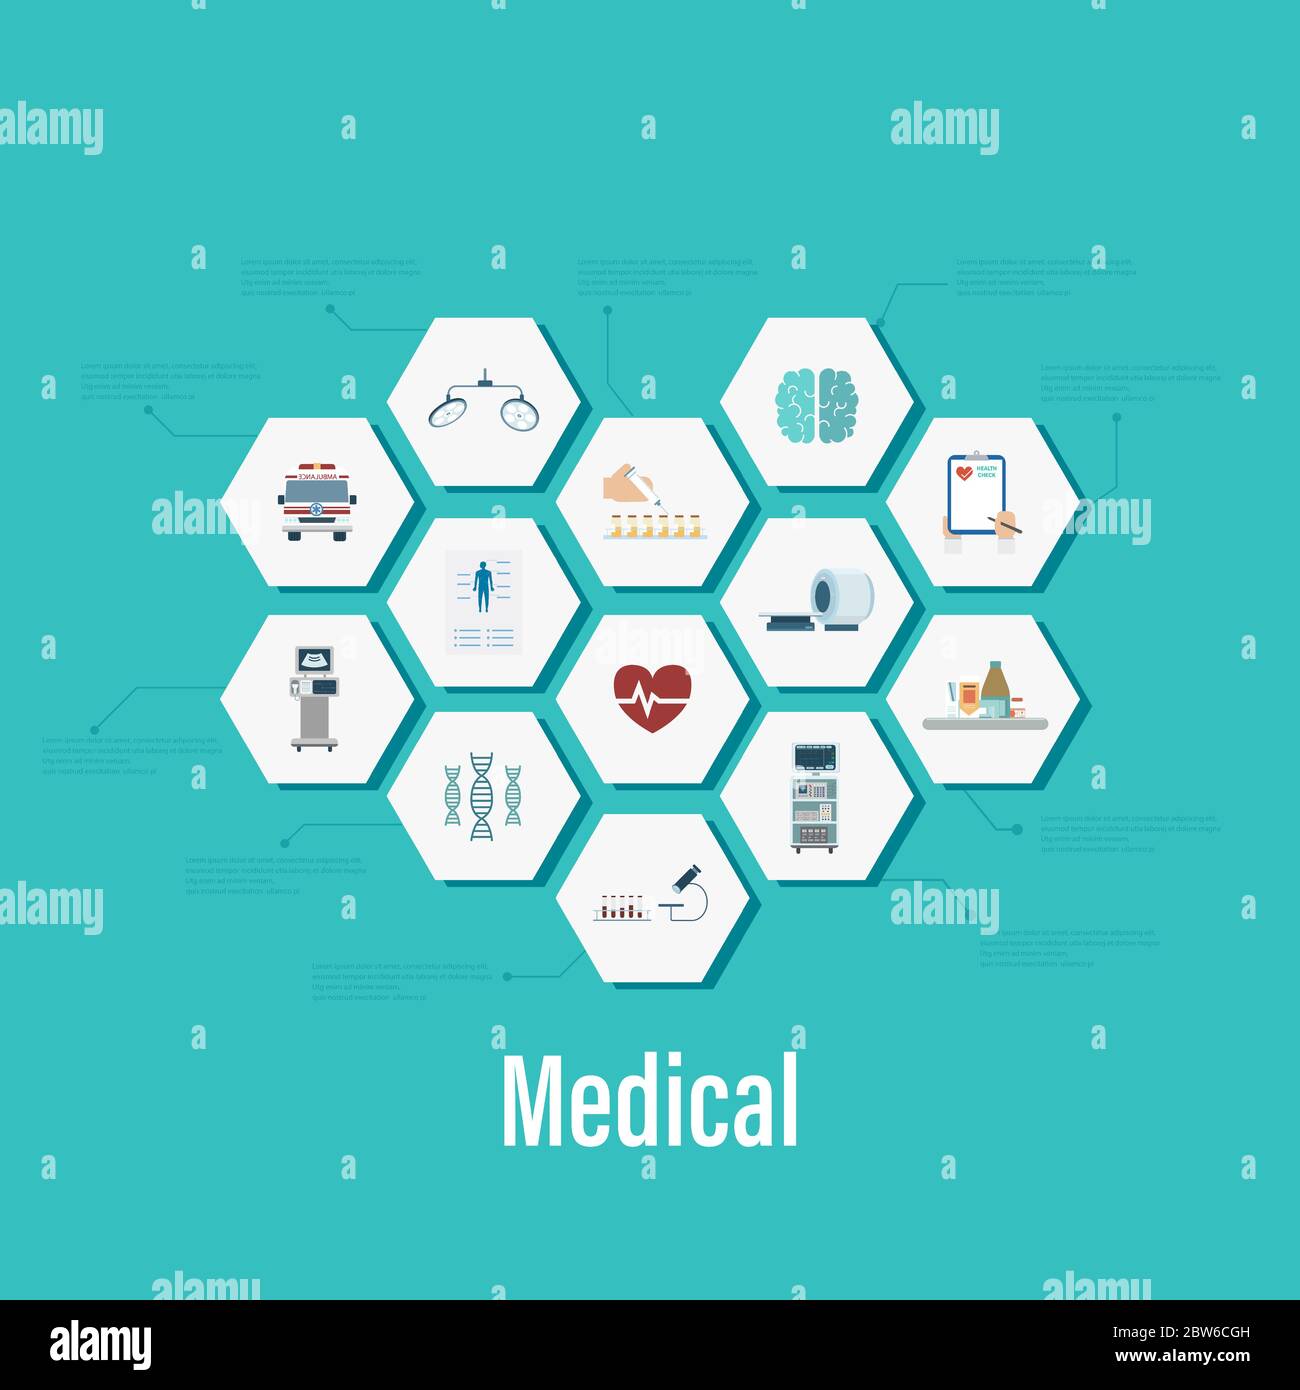 Medical infographic with medical icons flat design vector illustration Stock Vector